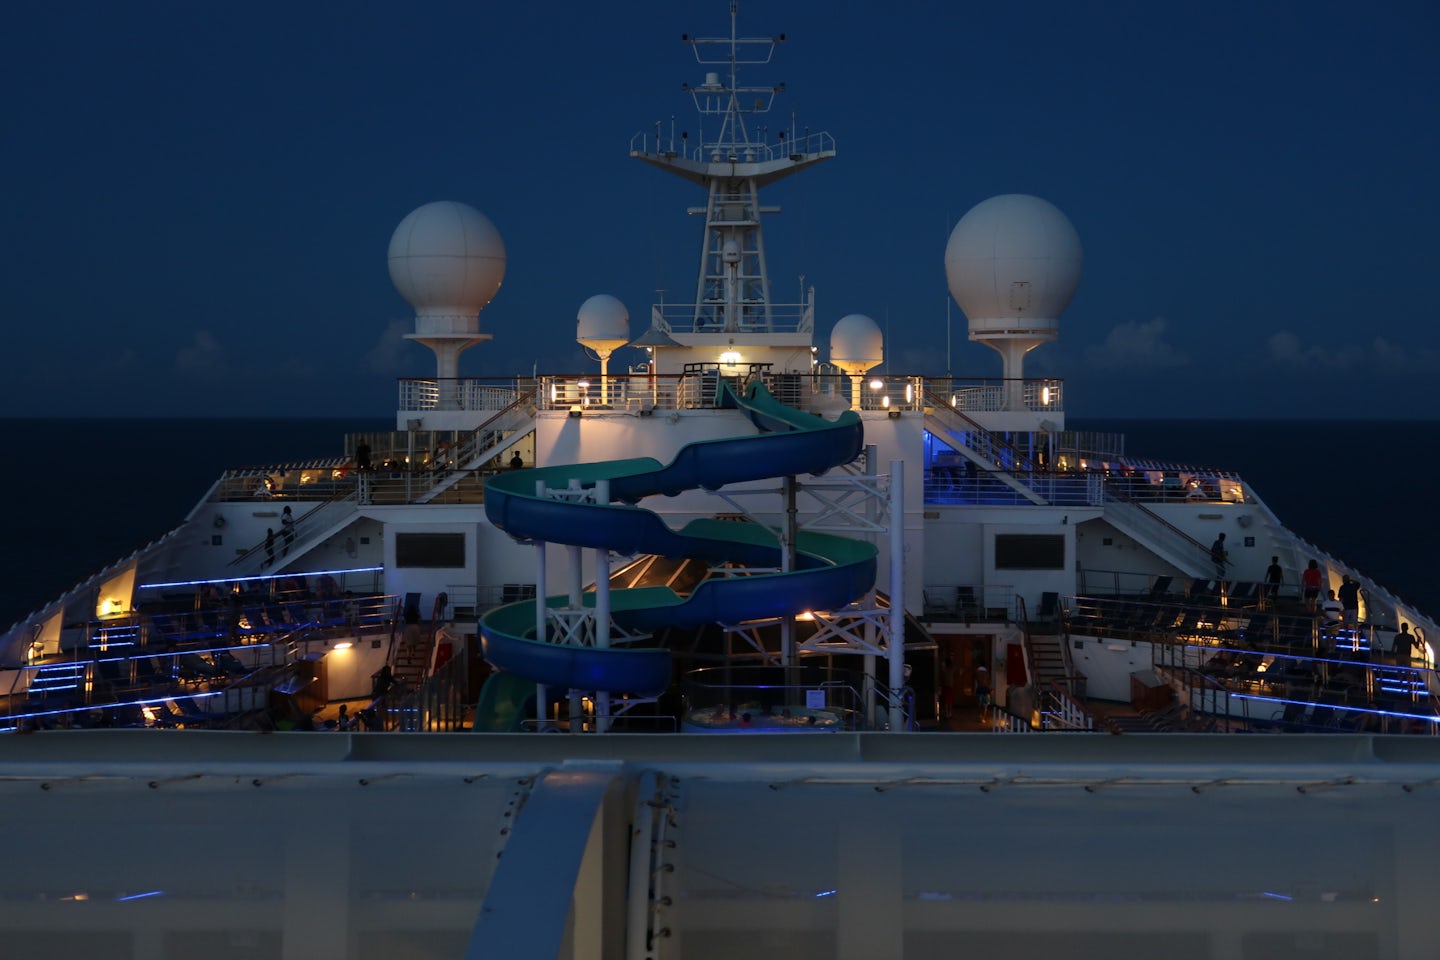 This is a night time photo of the slide located on the Lido deck